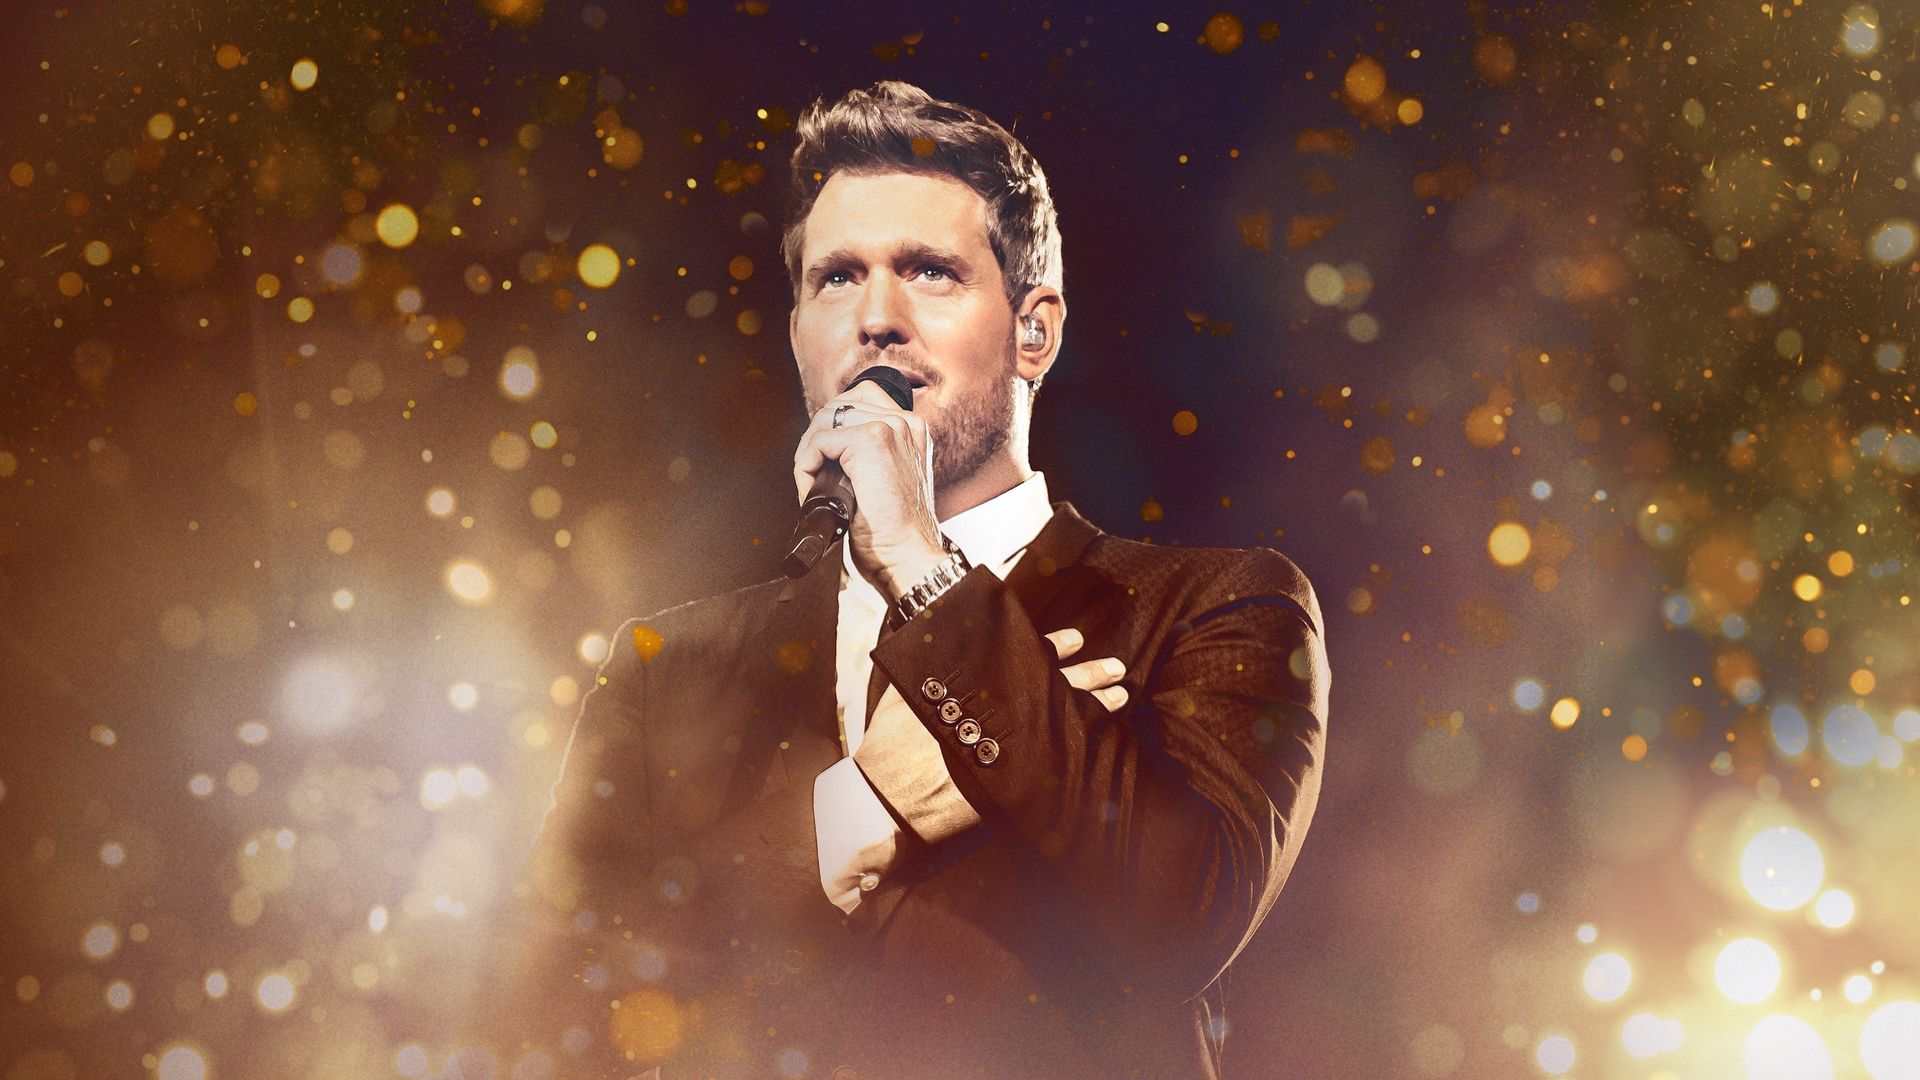 Michael Buble's Christmas in the City background